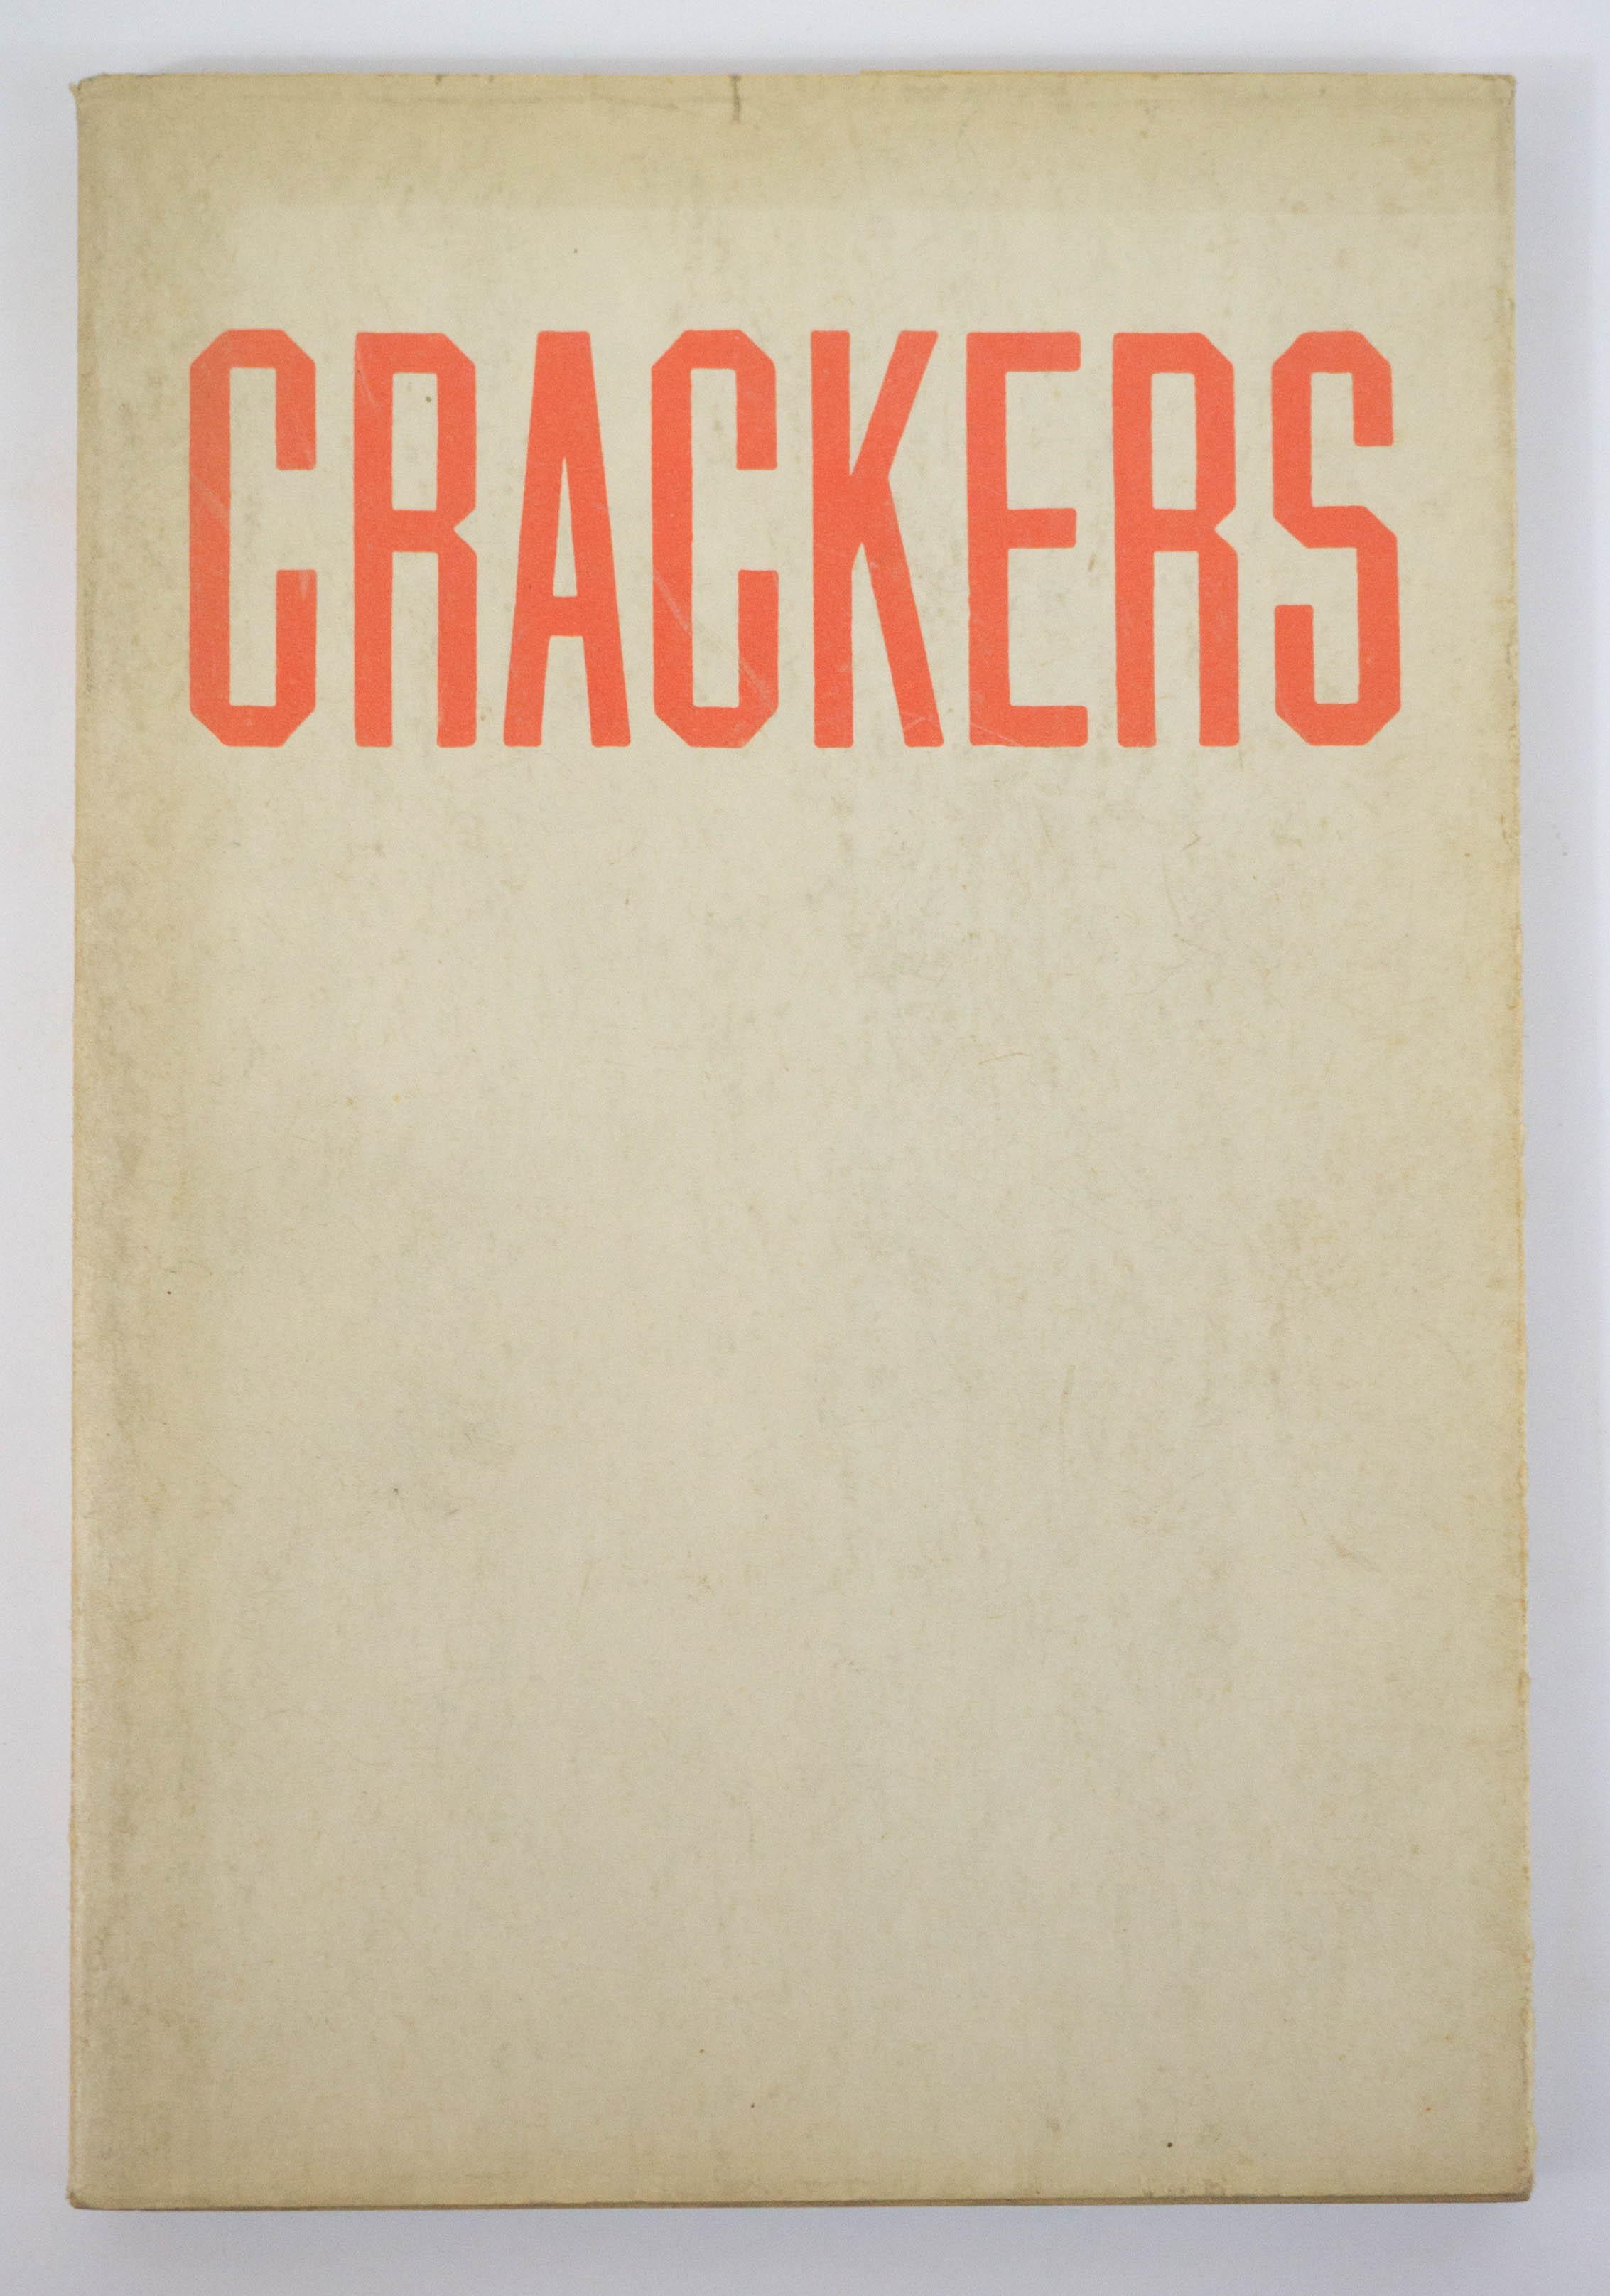 Crackers by Edward Ruscha 1969 First Edition